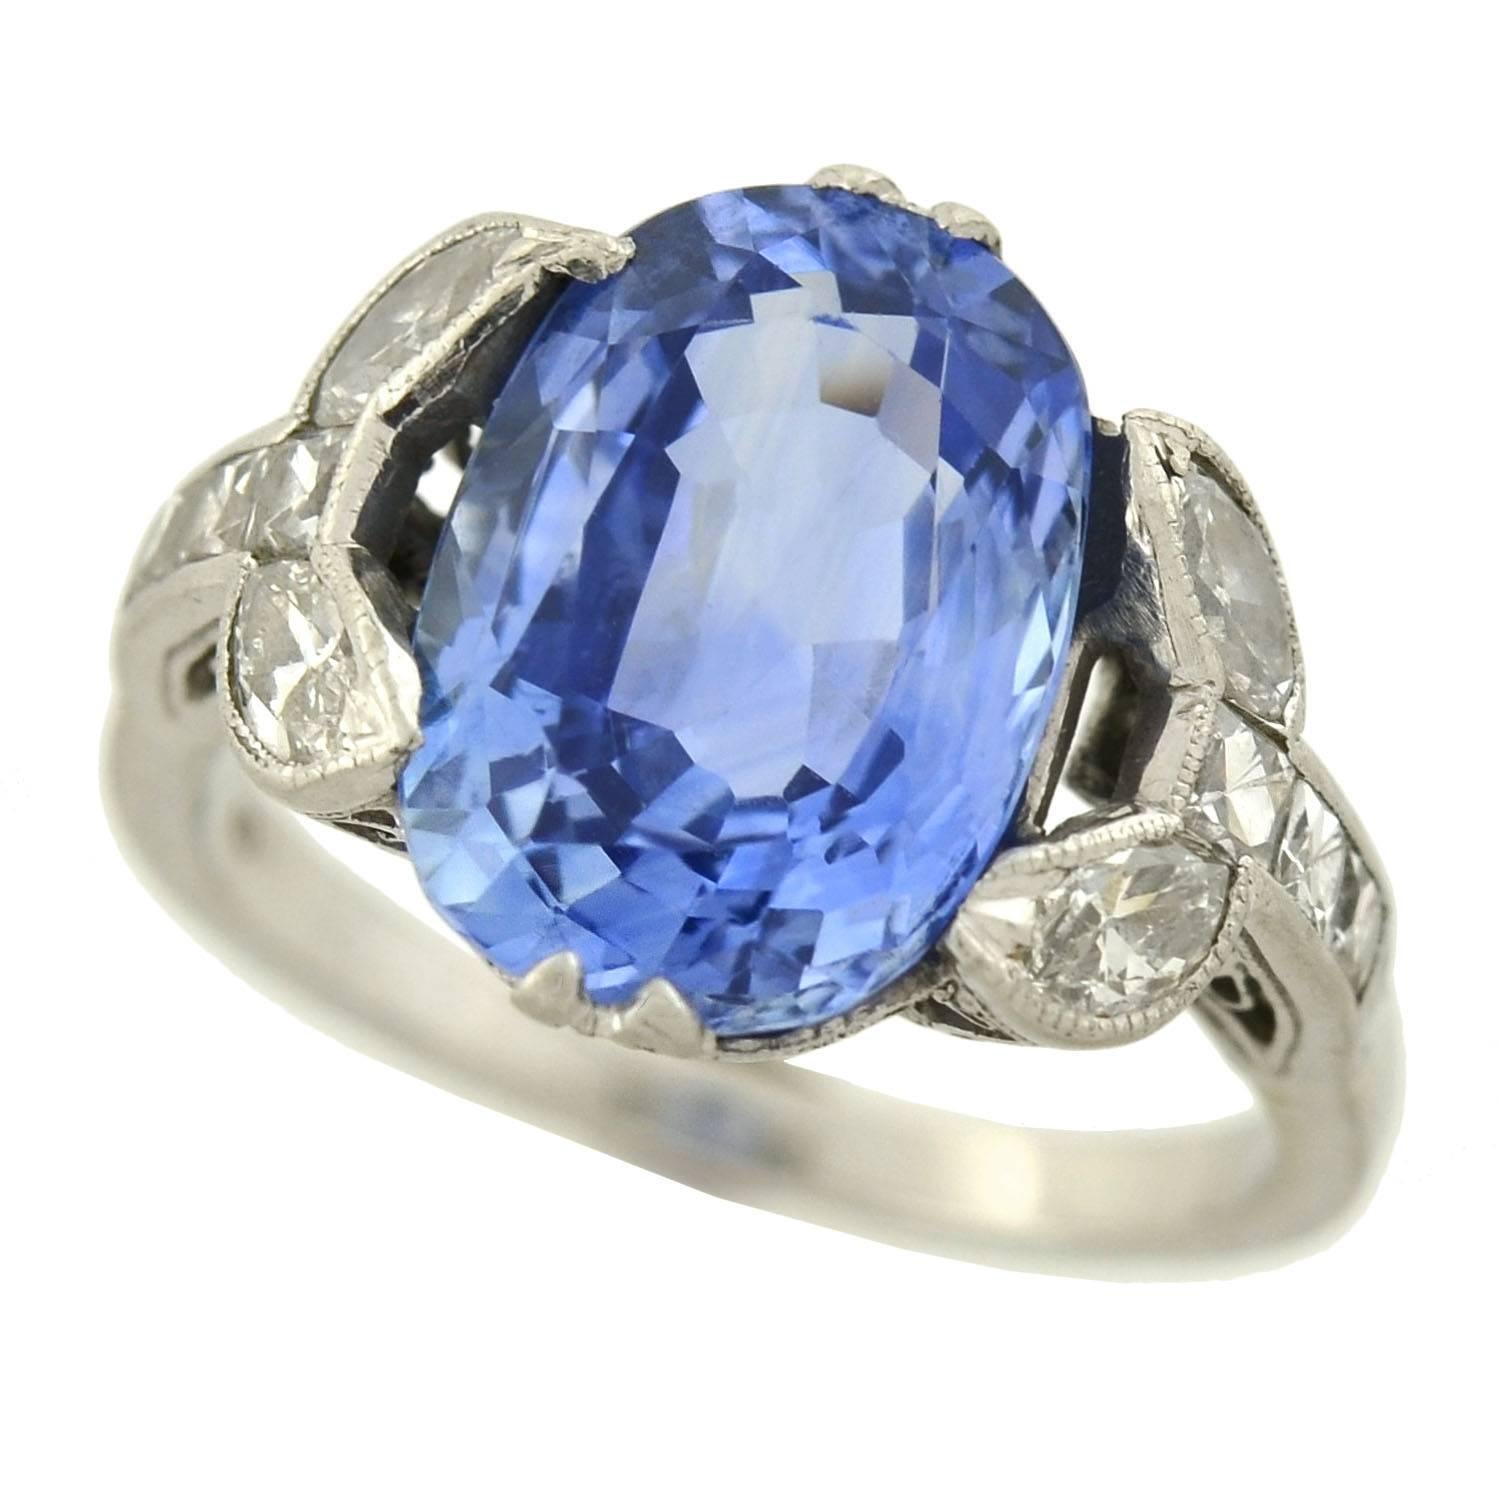 Women's Art Deco GIA Certified 4.15 Carat Natural Sapphire and French Cut Diamond Ring